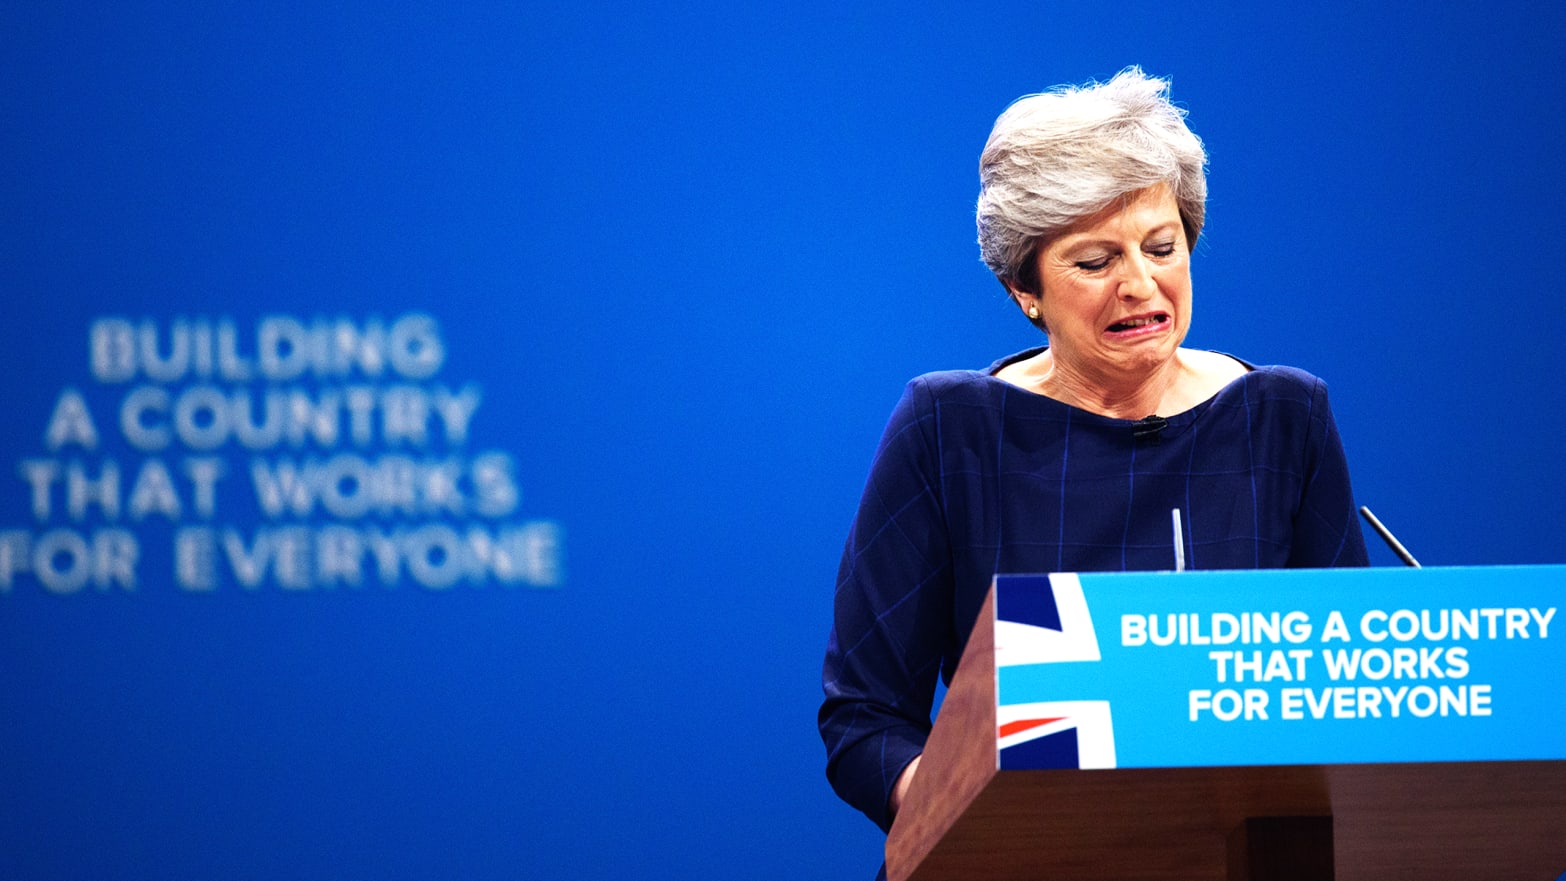 The Sexist Bullying of Britain’s Prime Minister Must Stop